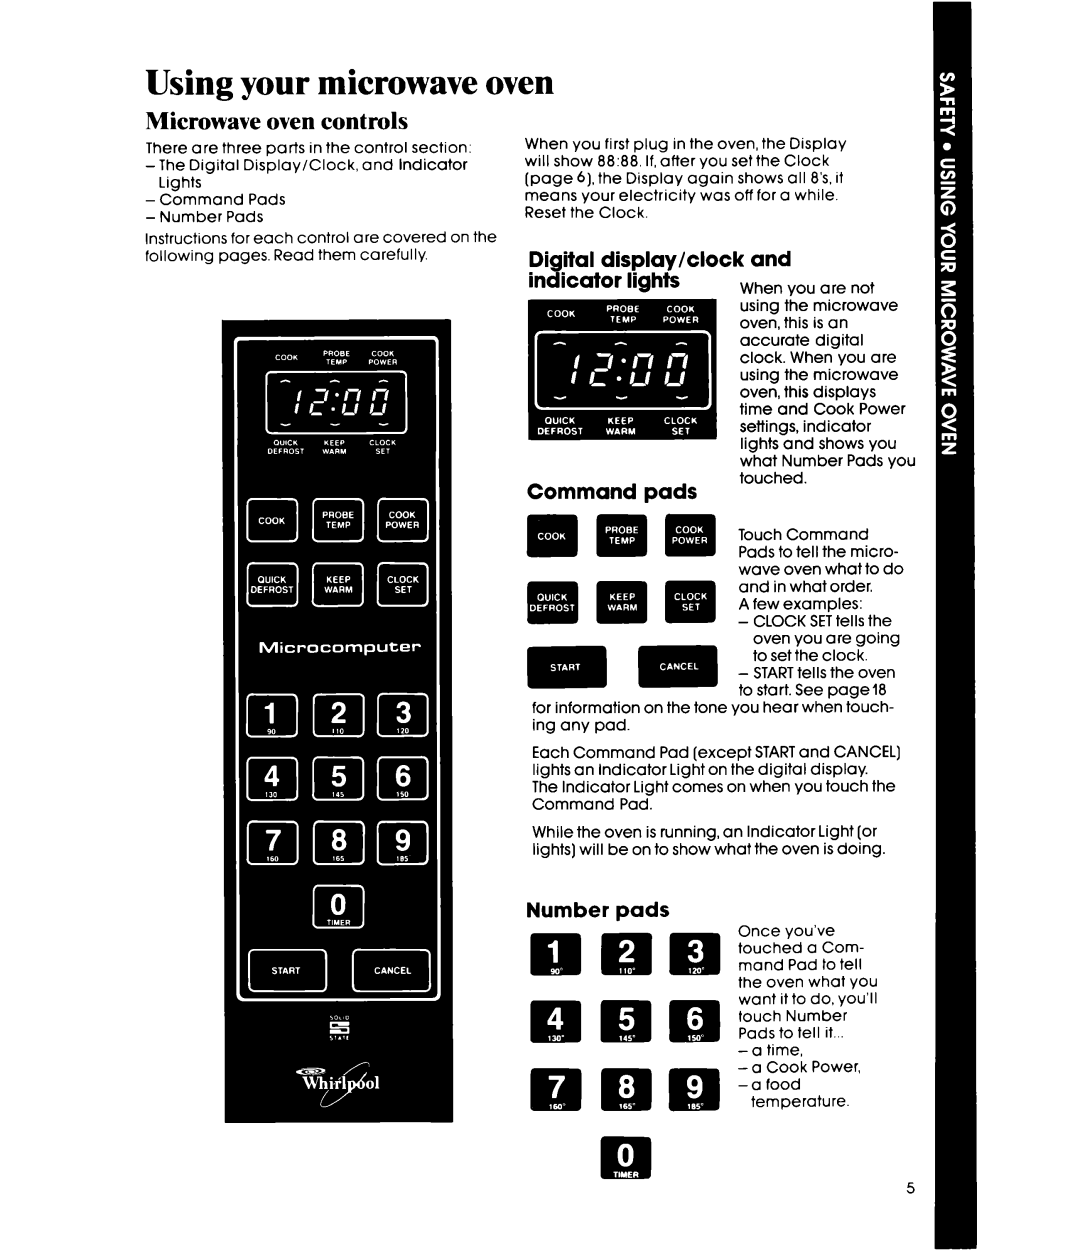 Whirlpool MW865EXR, MW8600XR, MW8650XR manual Using your microwave oven, Microwave oven controls, Command pads, Number pads 